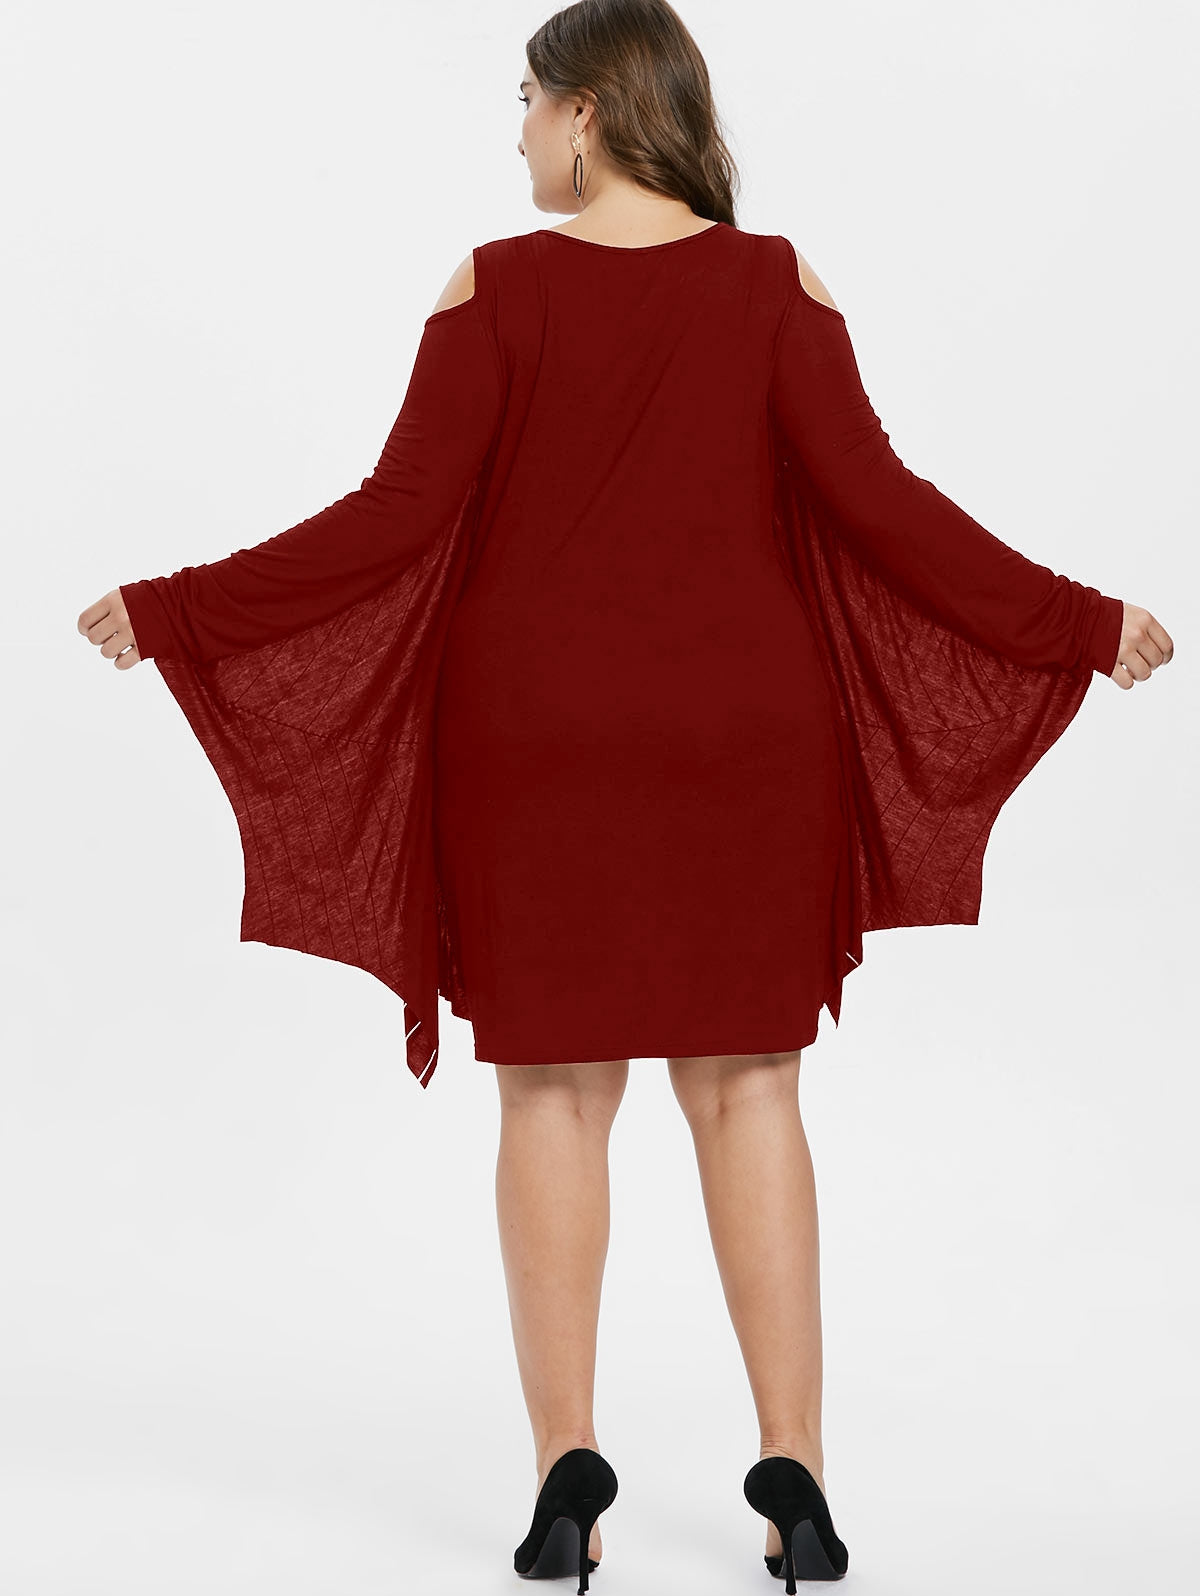 Plus Size Halloween Spider Net Print Batwing Sleeve Dress Sz. (L) Color: (Red Wine)